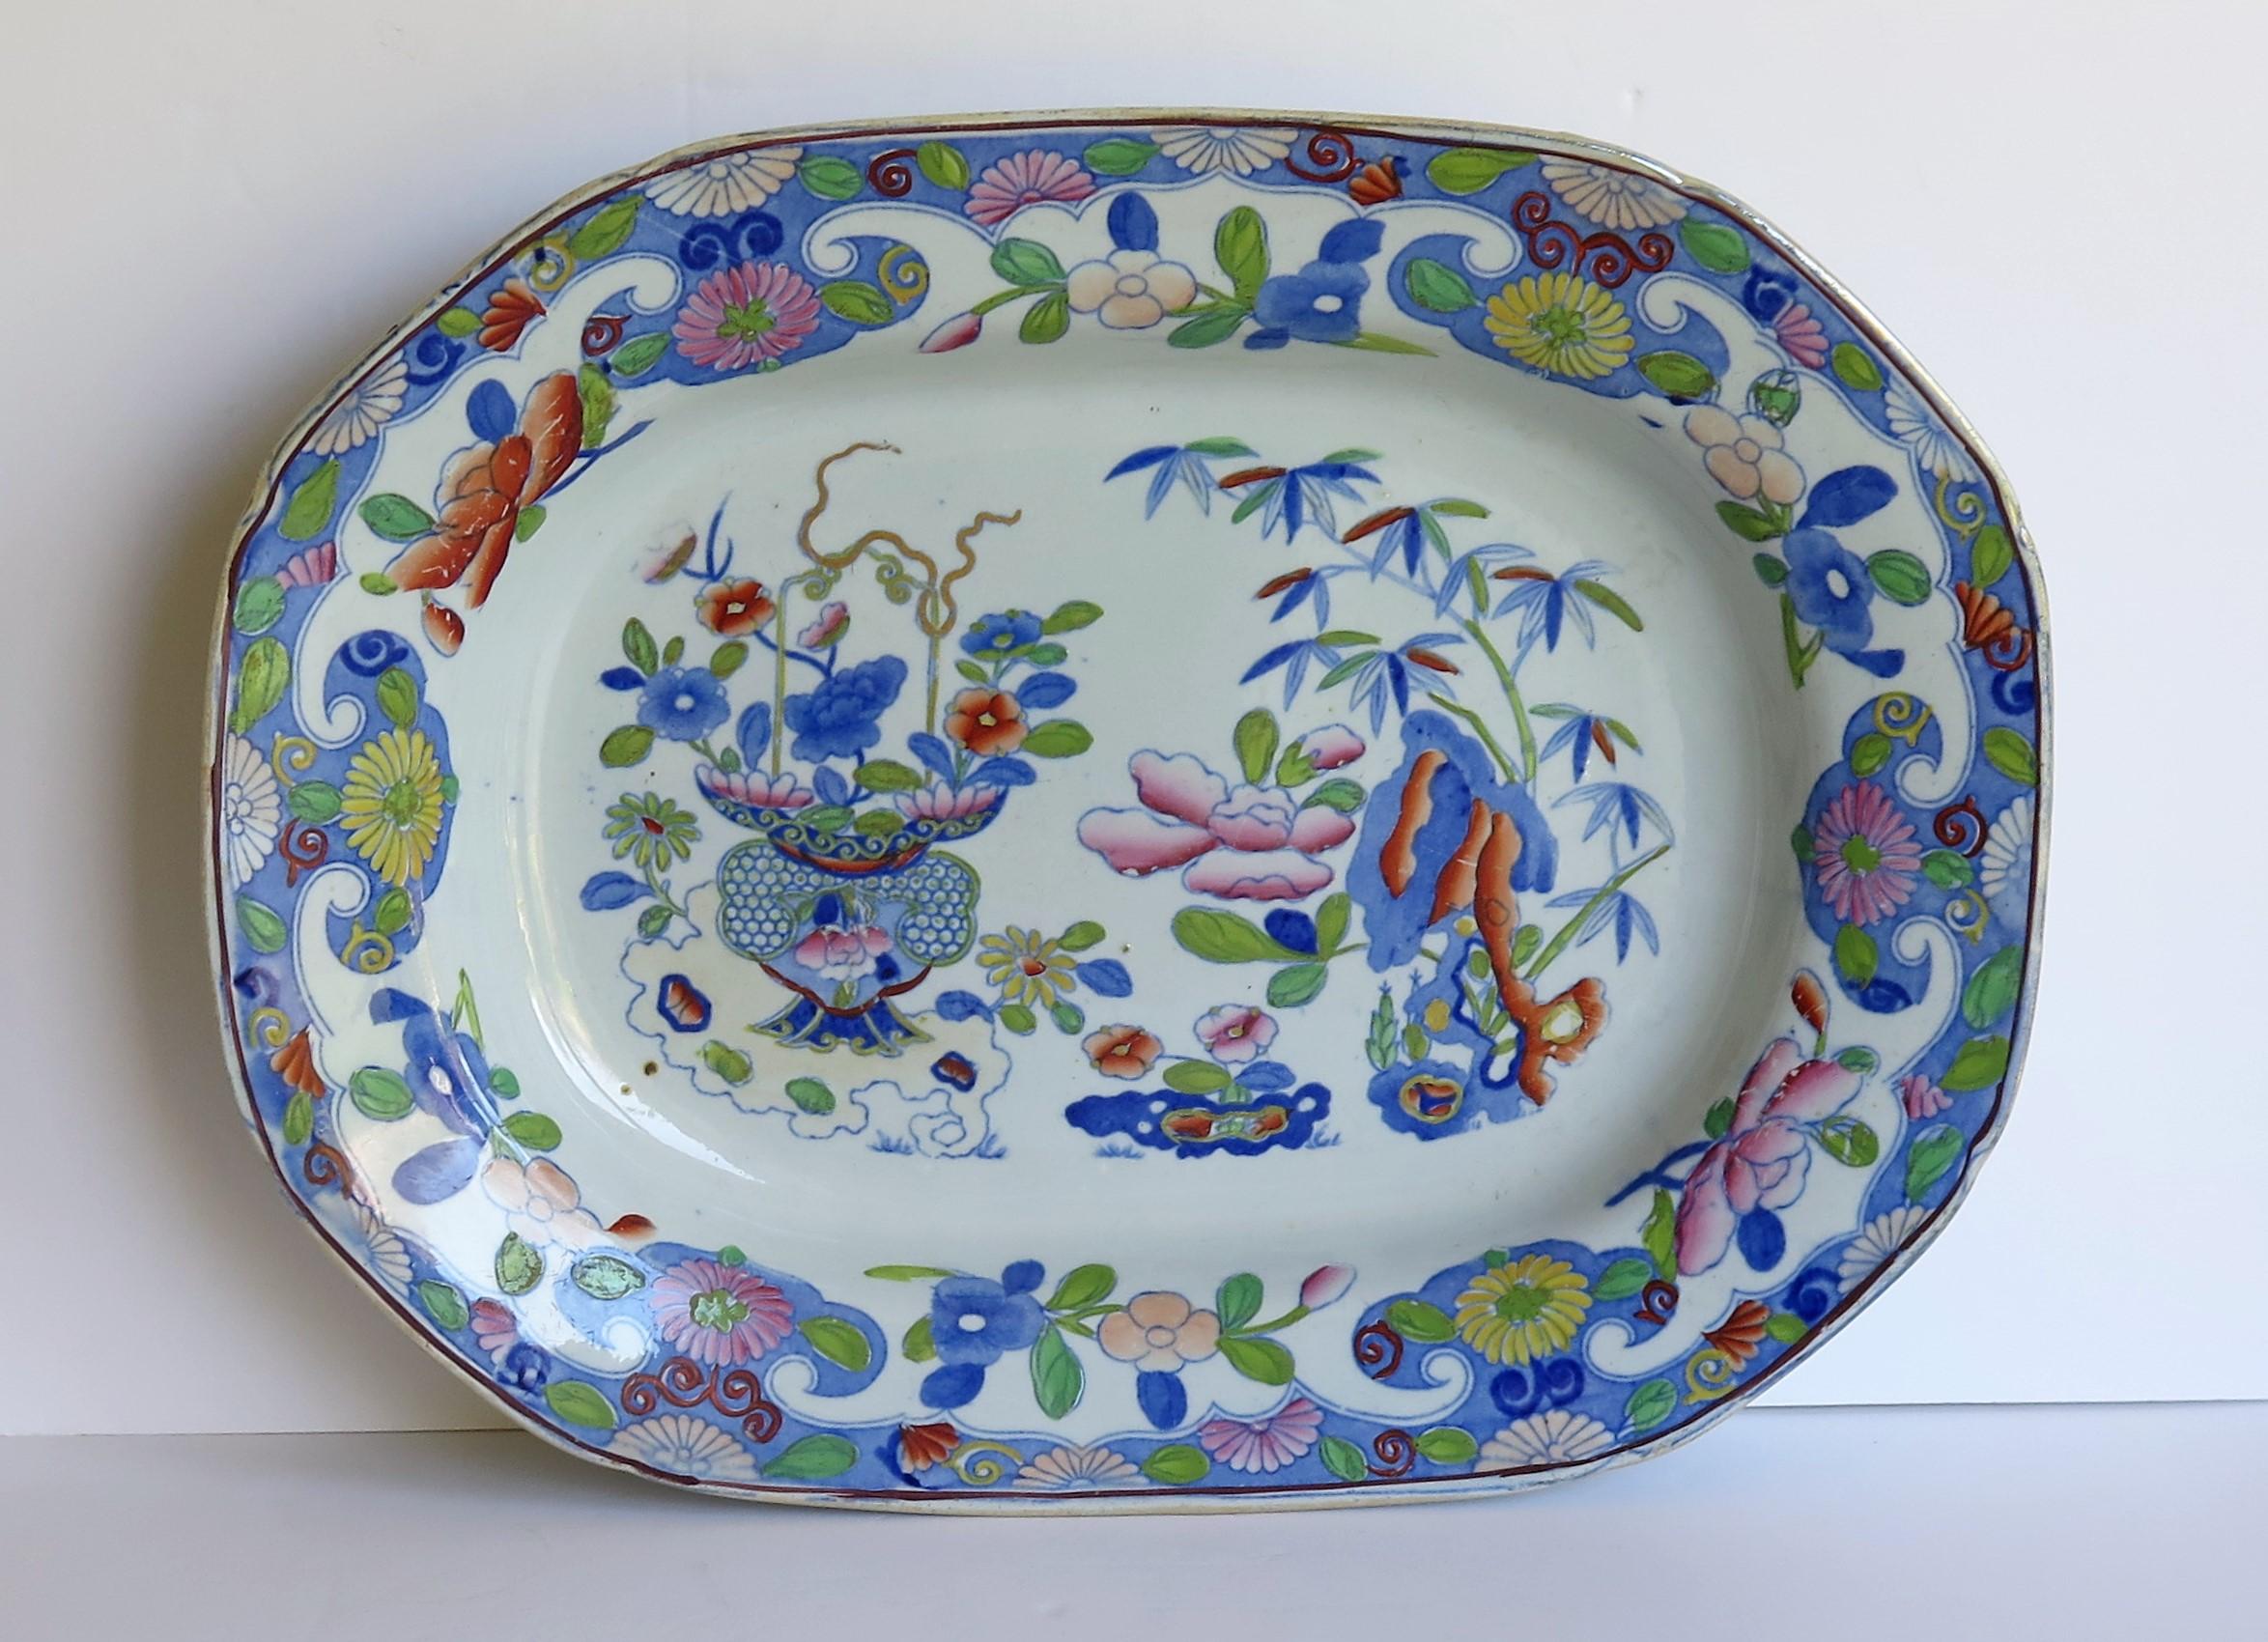 This a large, early 19th century serving dish of 14.5 inch width made by Mason's Ironstone in the Bamboo and Basket chinoiserie pattern, dating to the English Georgian period, Circa 1815.

Very early 19th century Mason's Ironstone Serving Dishes